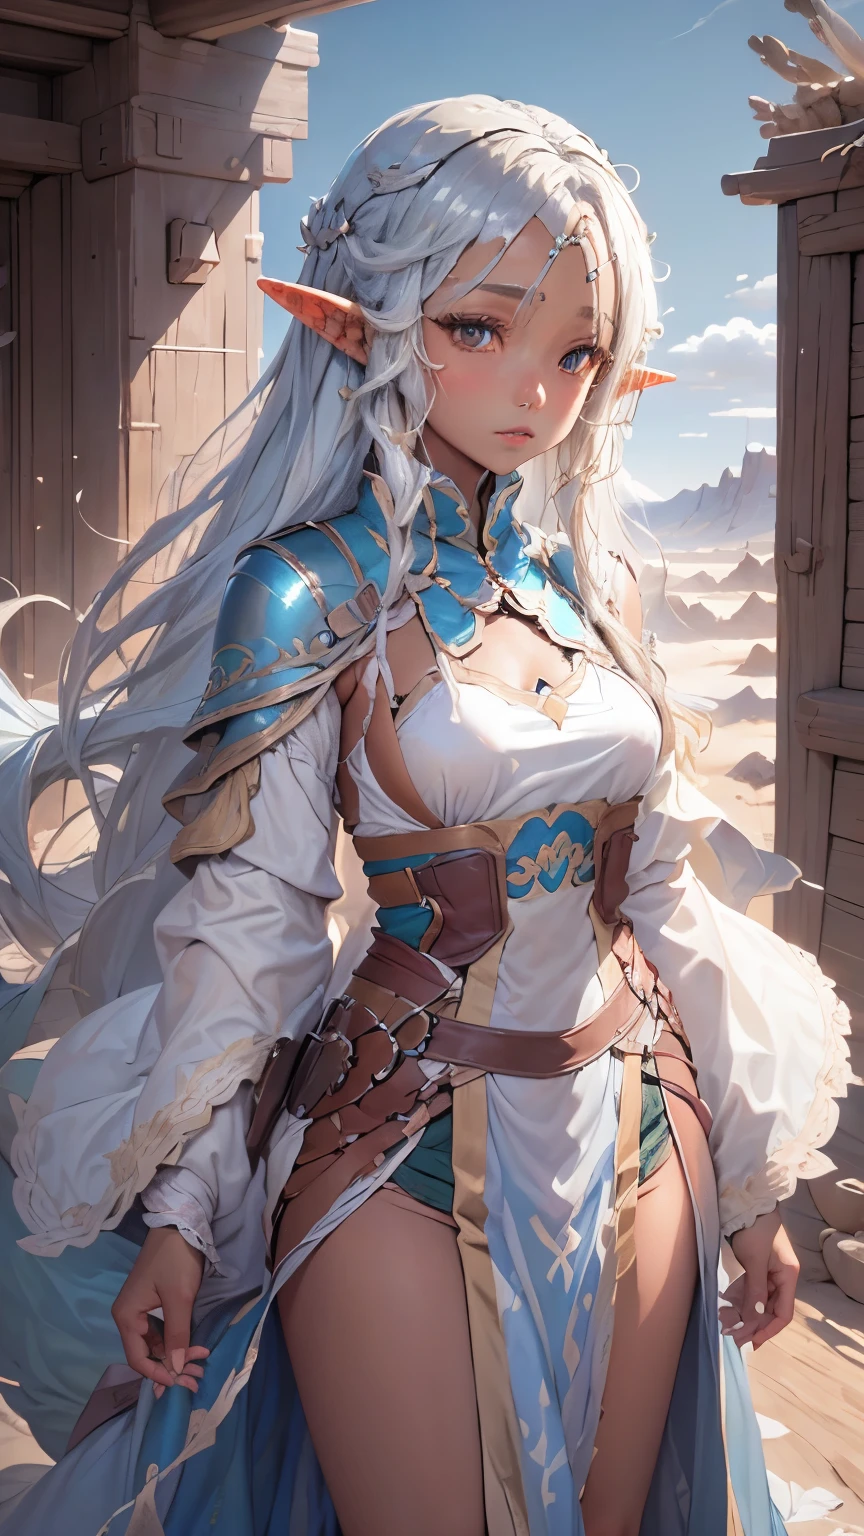 One Woman。Beautiful woman。silver long hair。Brown Skin。Desert Elf。desert people clothing。The background is blue sky and white clouds、Desert as far as the eye can see。